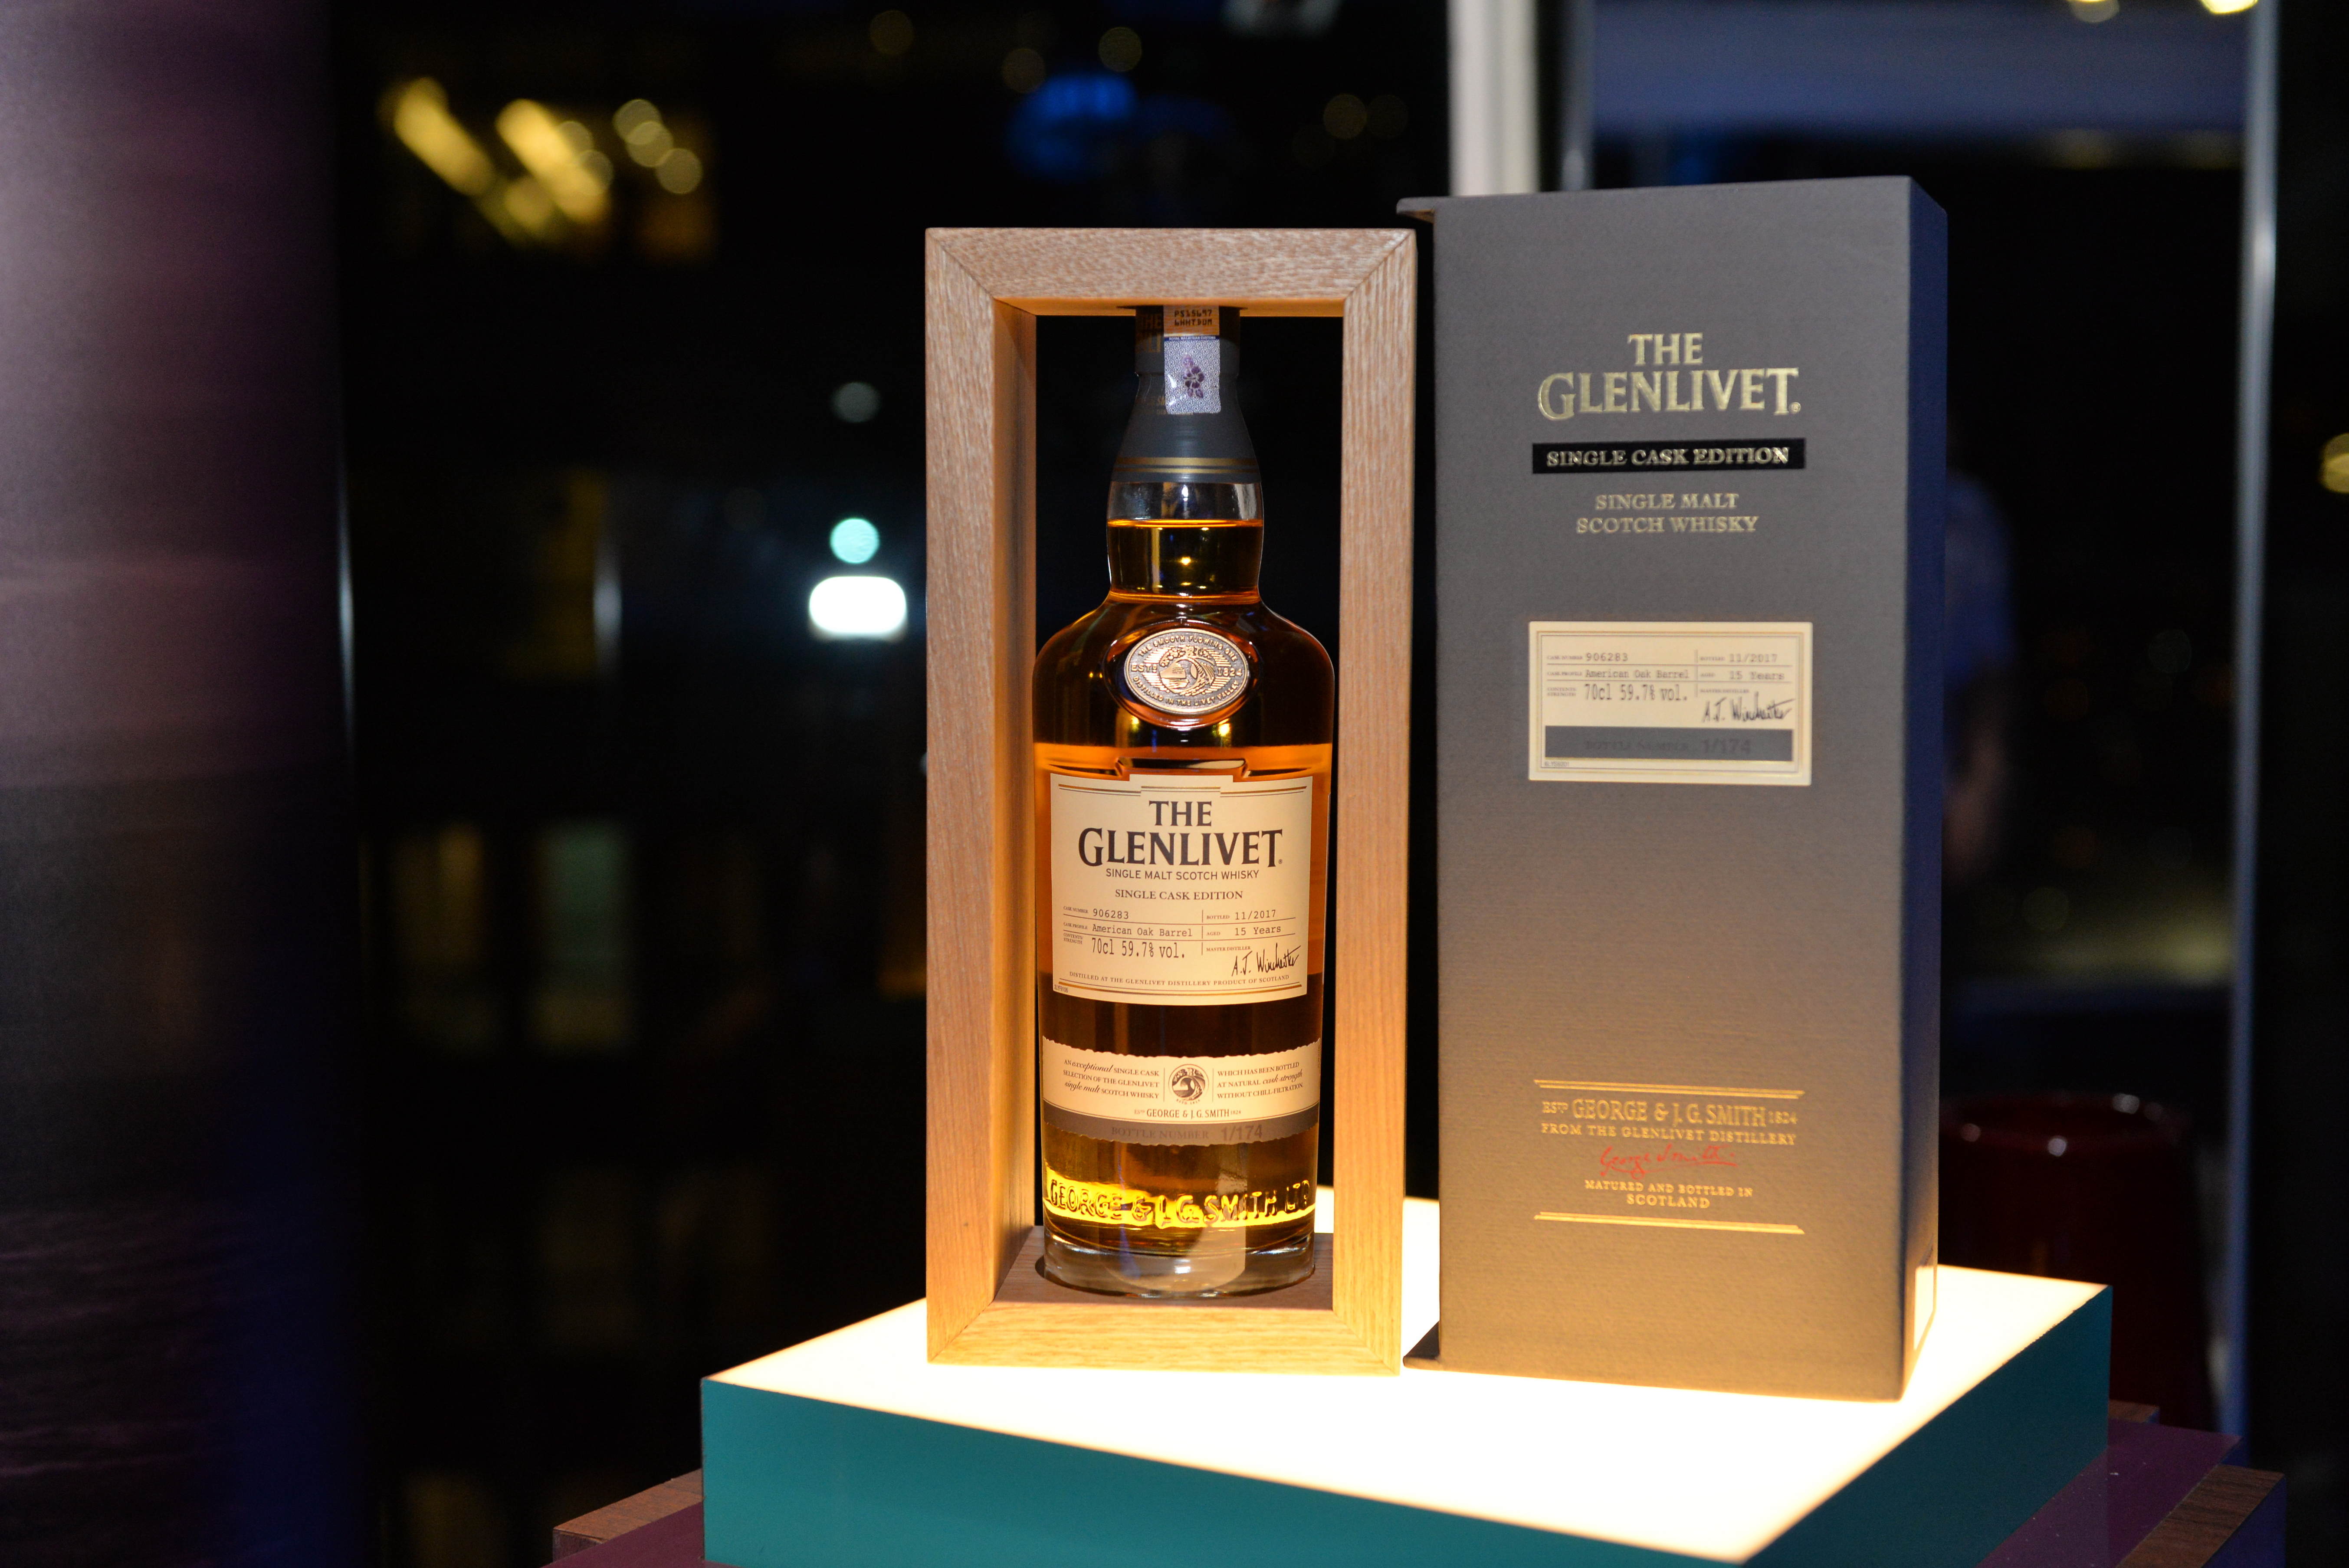 Spirit spotlight: This Glenlivet 15 Year Old Single Cask Edition is only available in Malaysia